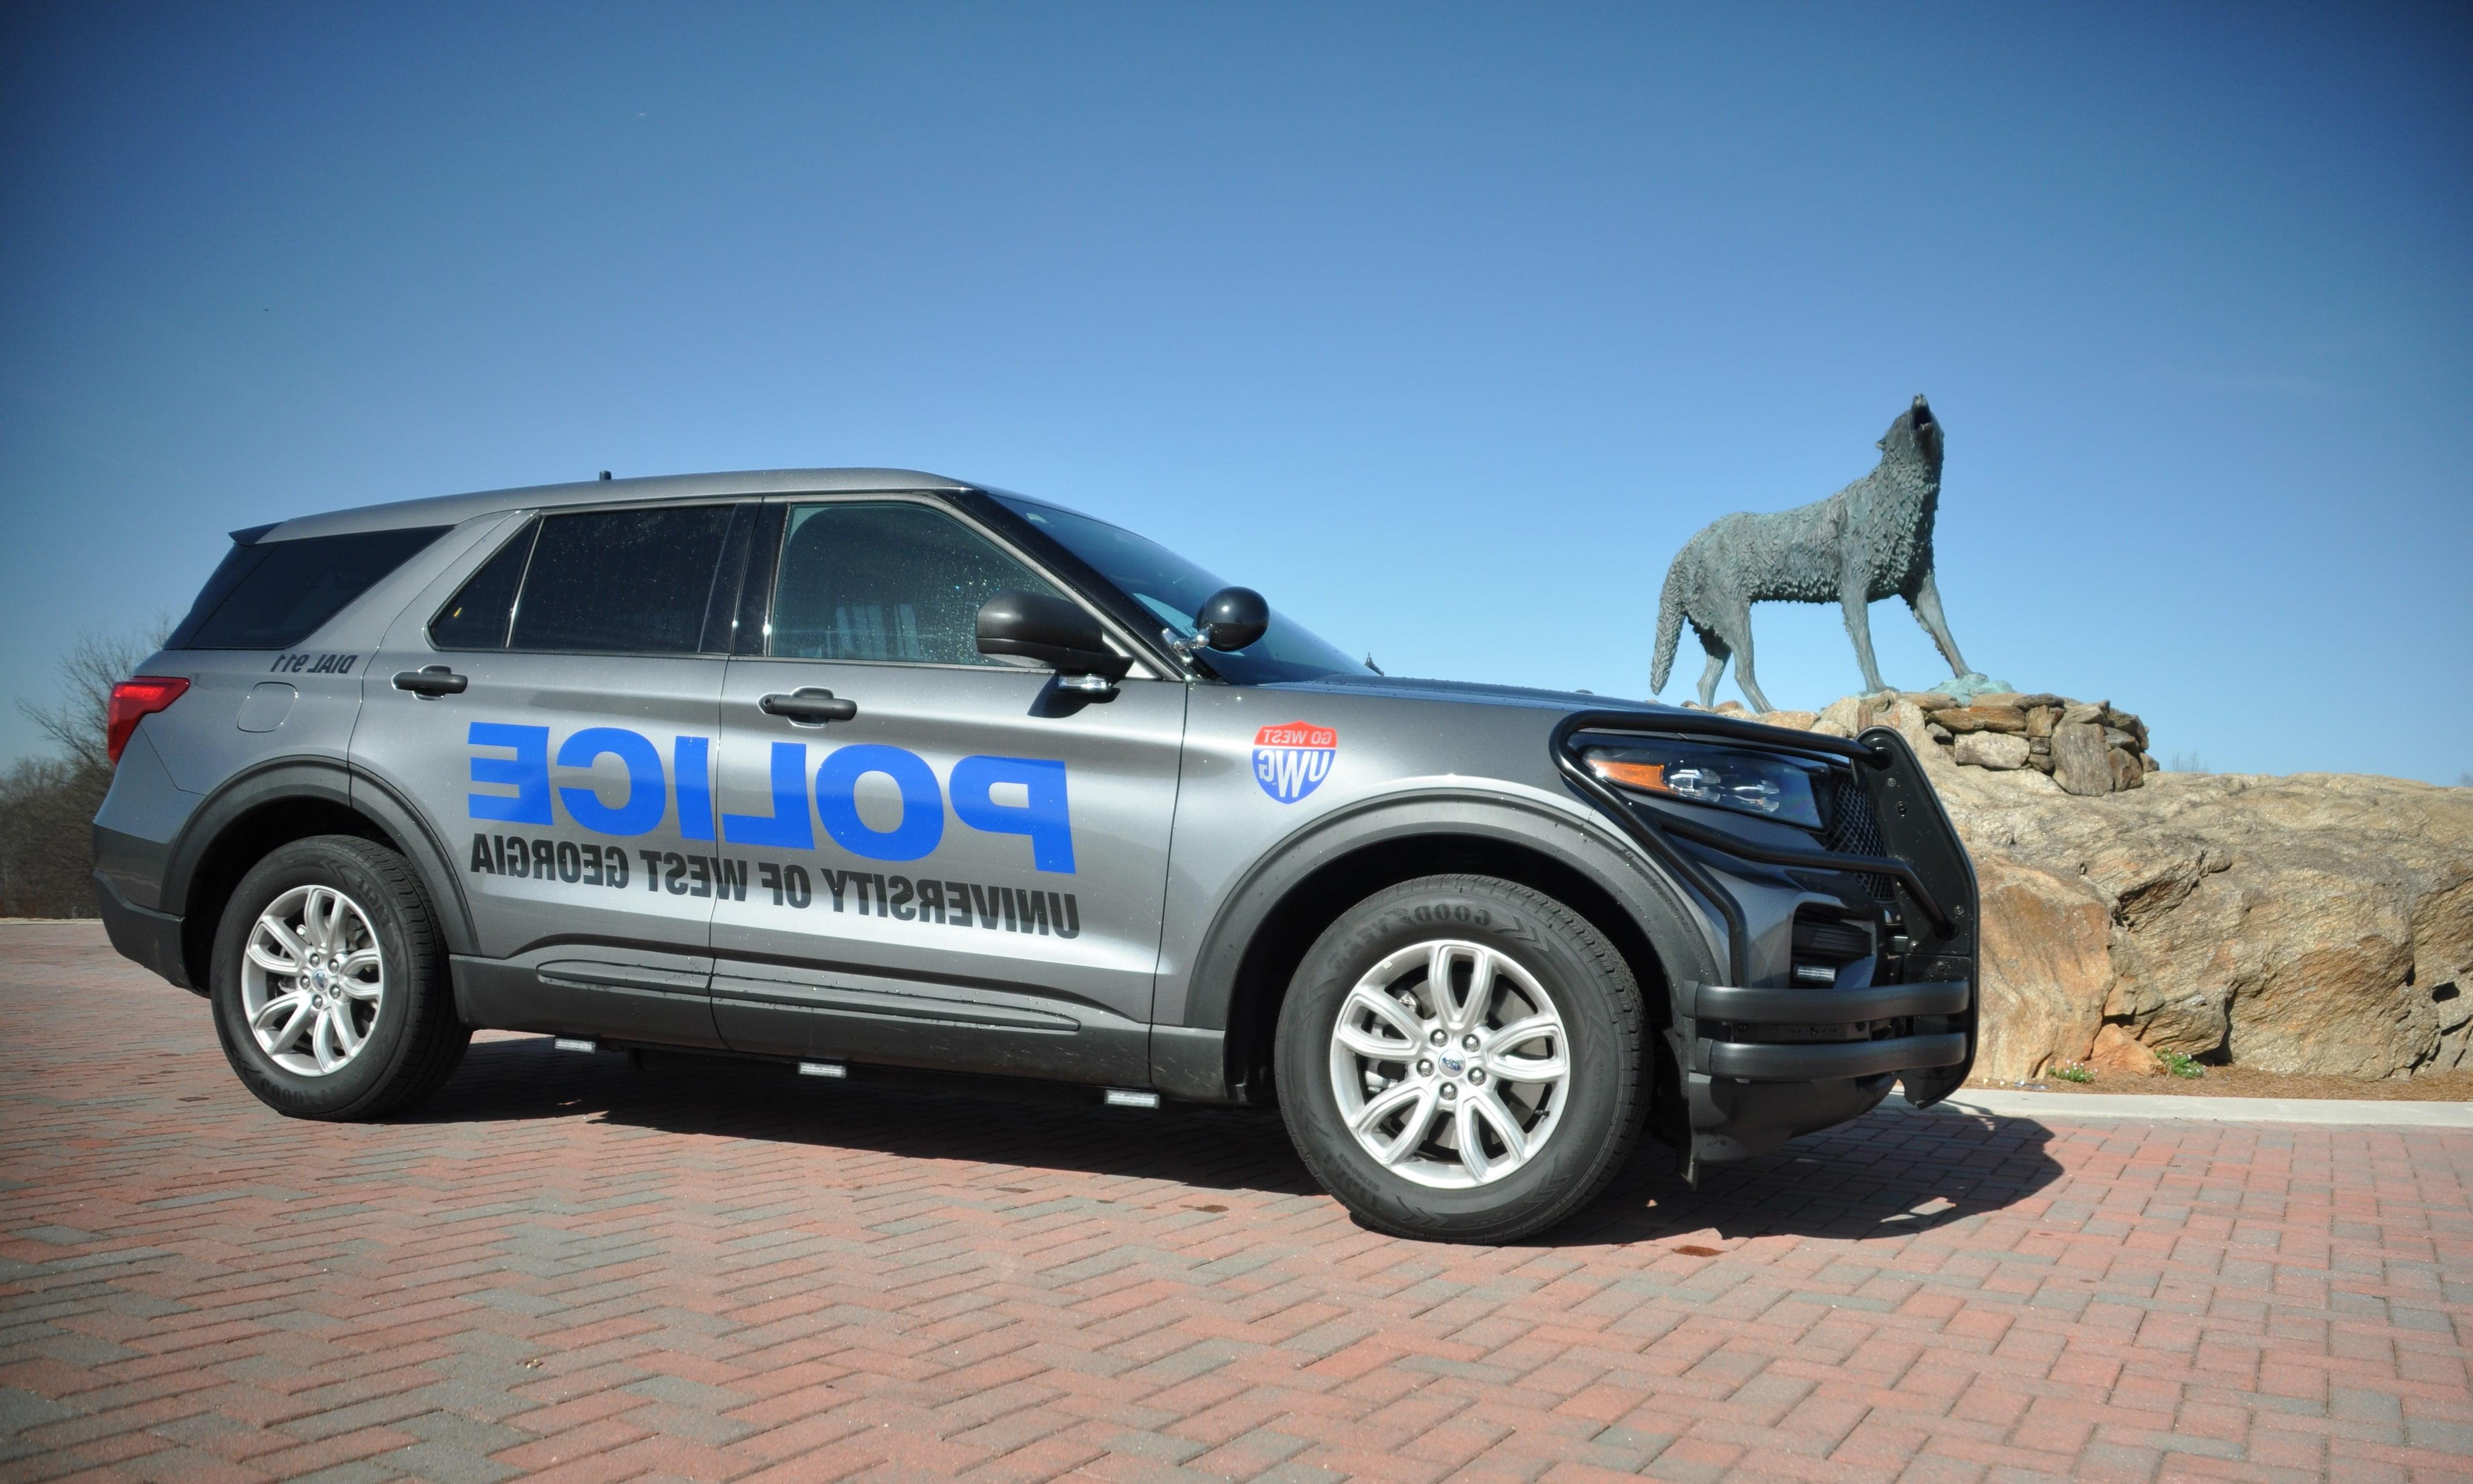 Dark grey police vehicle parked at wolf plaza with the wolf statue positioned behind.